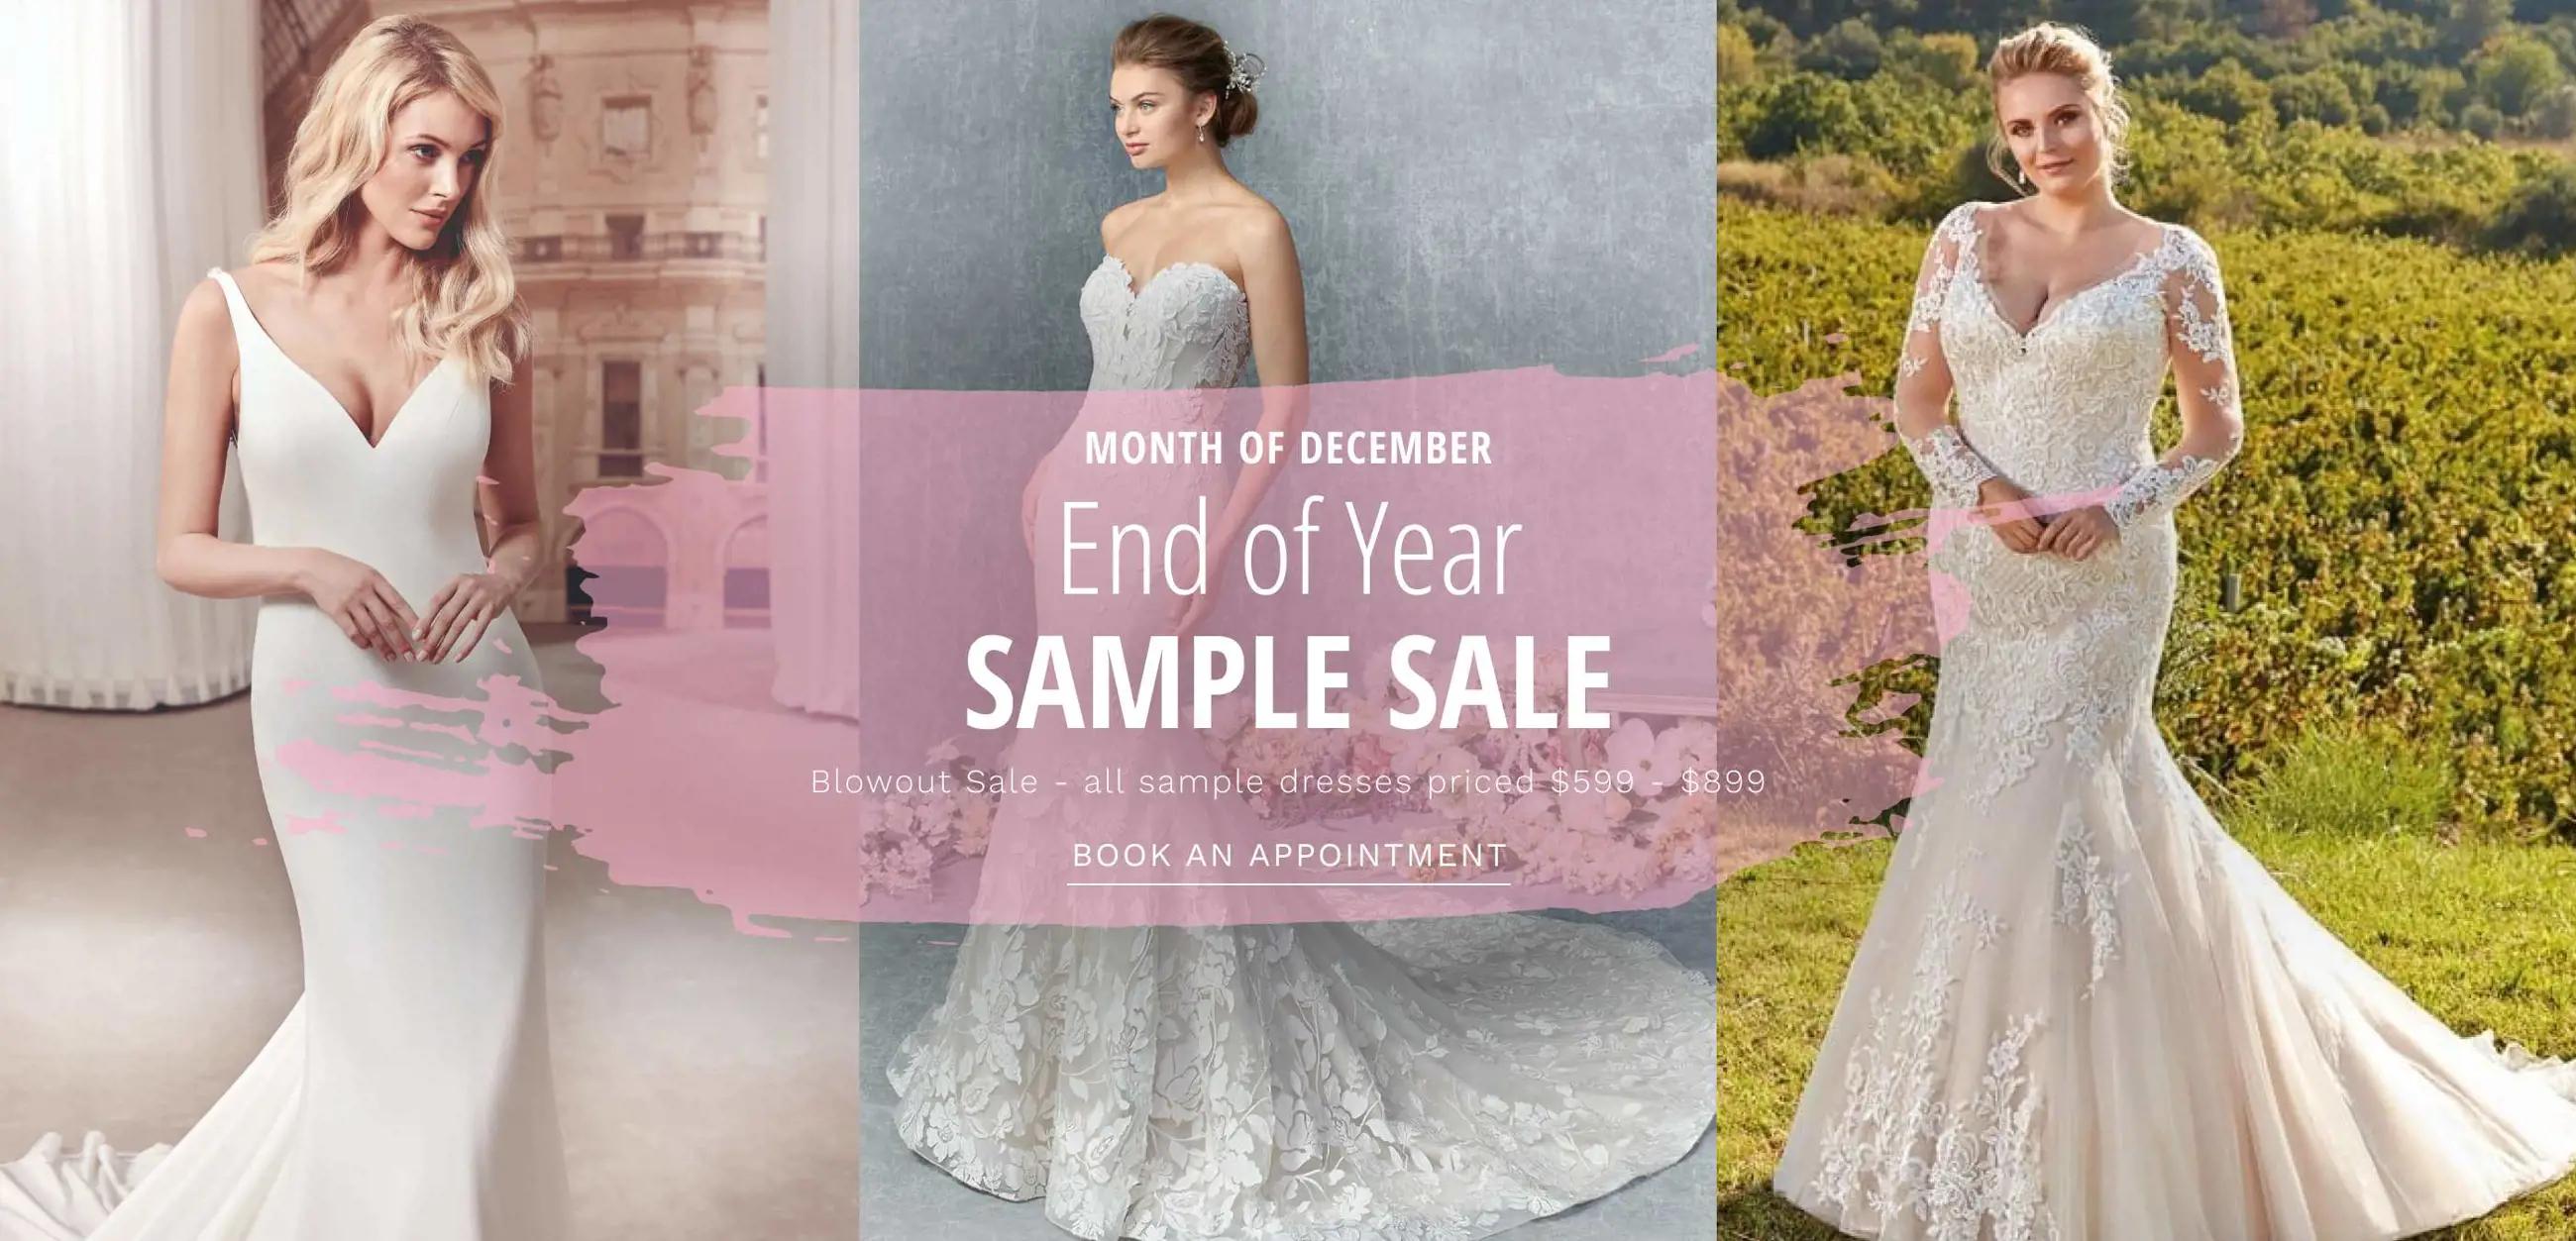 End of Year Sample Sale at Dublin Bridal